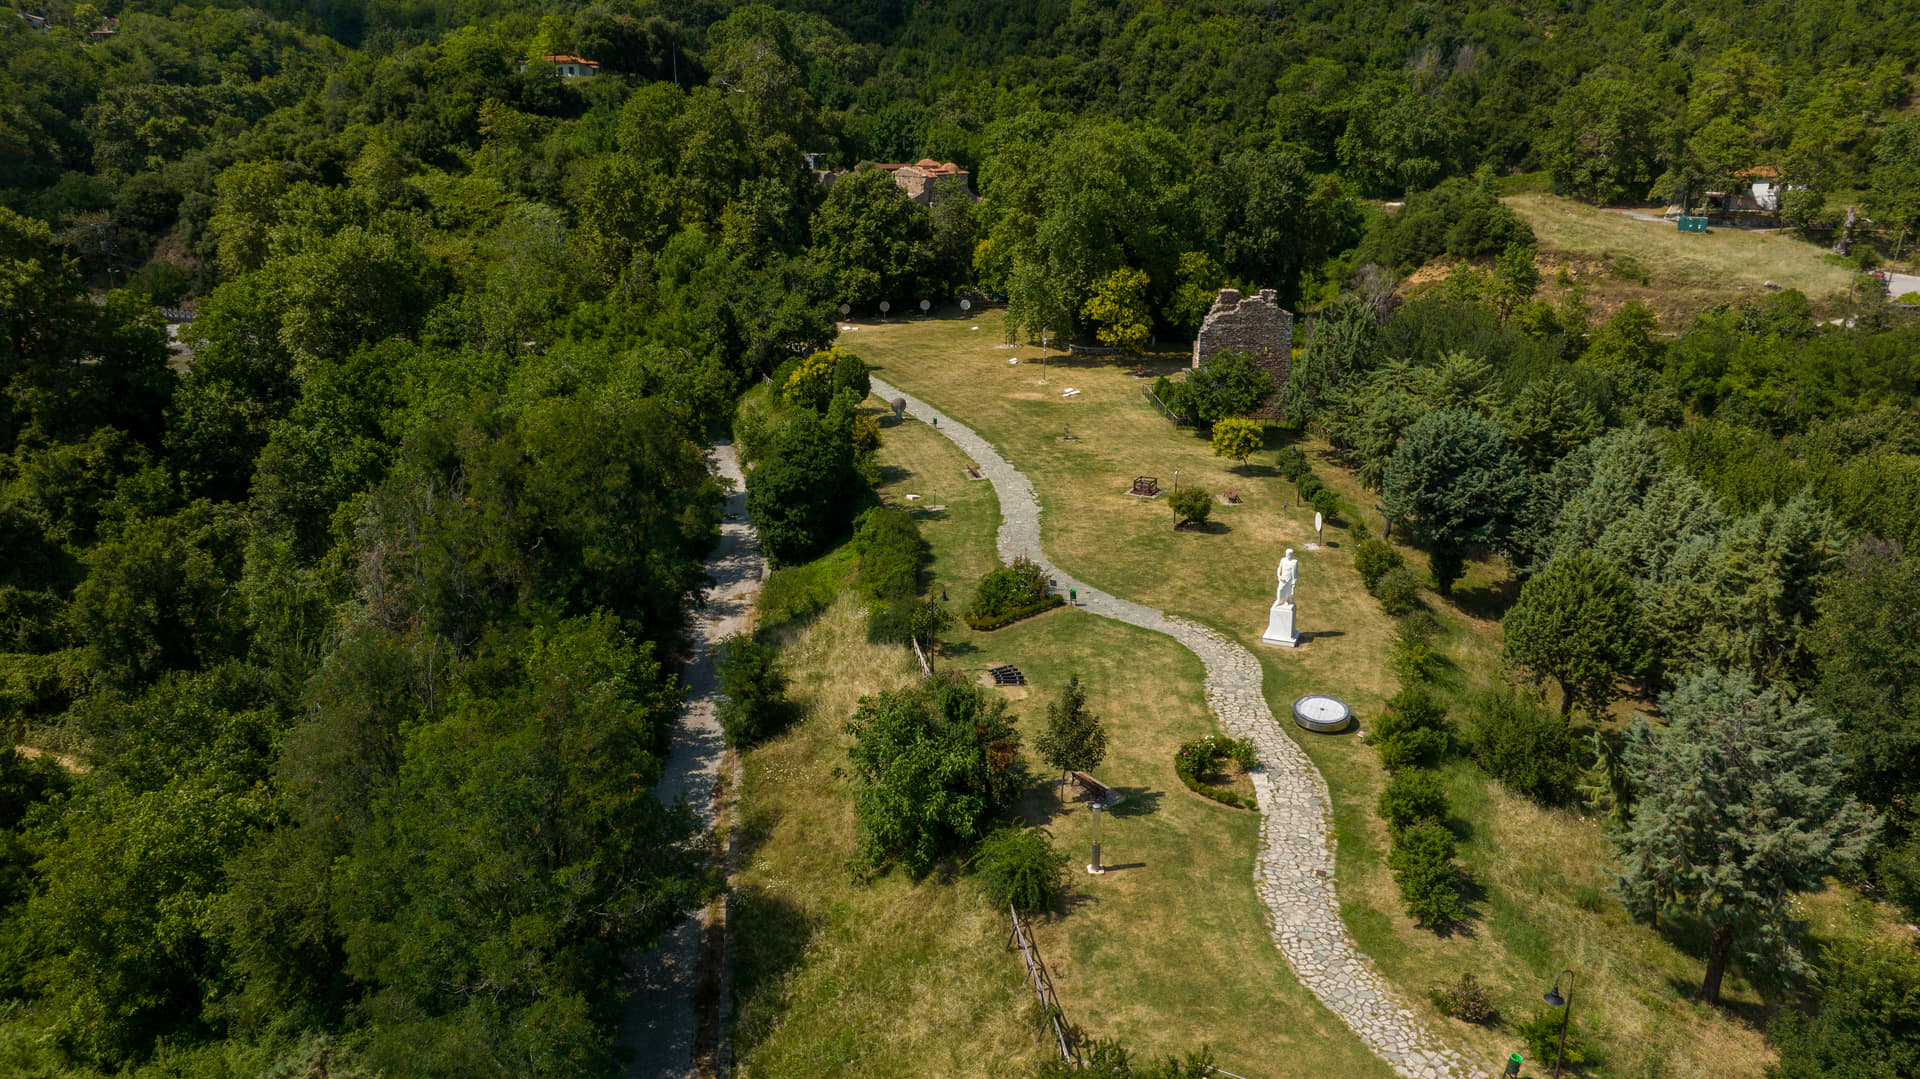 Aristotle’s Park in Halkidiki features hands-on instruments designed to demonstrate Aristotle's 'Naturals' principles.